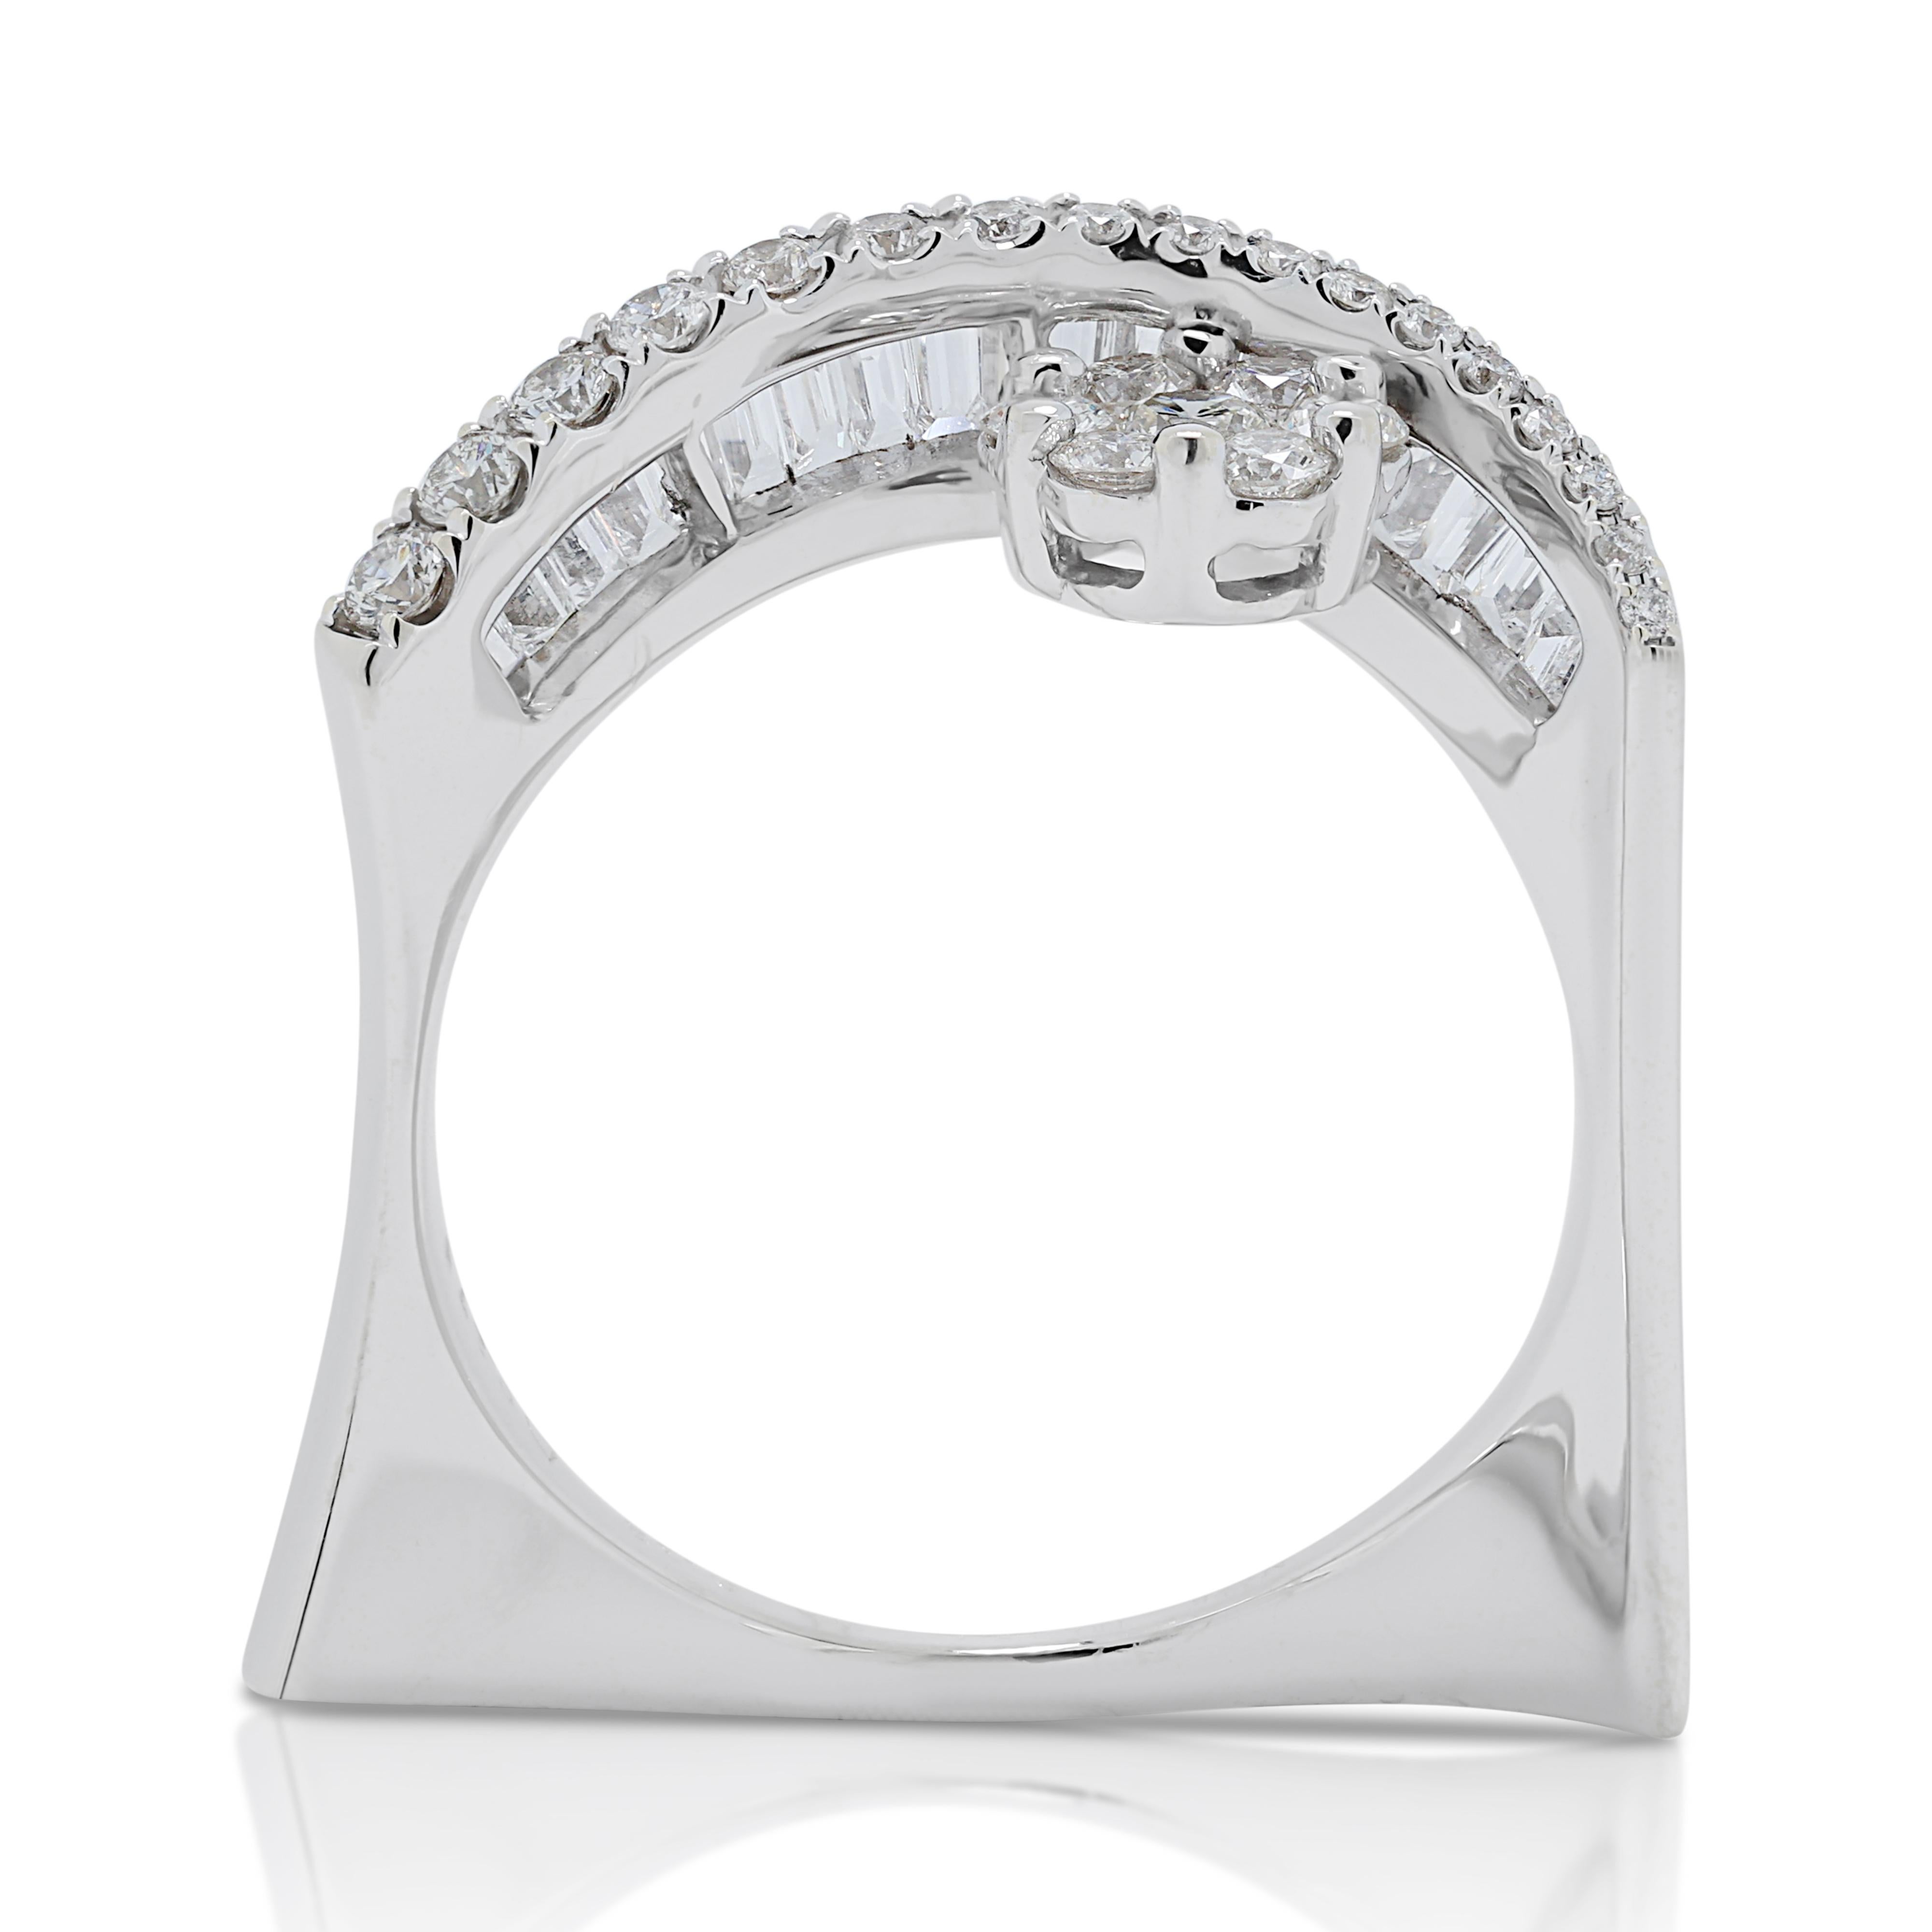 Stylish 0.85ct Diamonds Ring in 18K White Gold For Sale 1